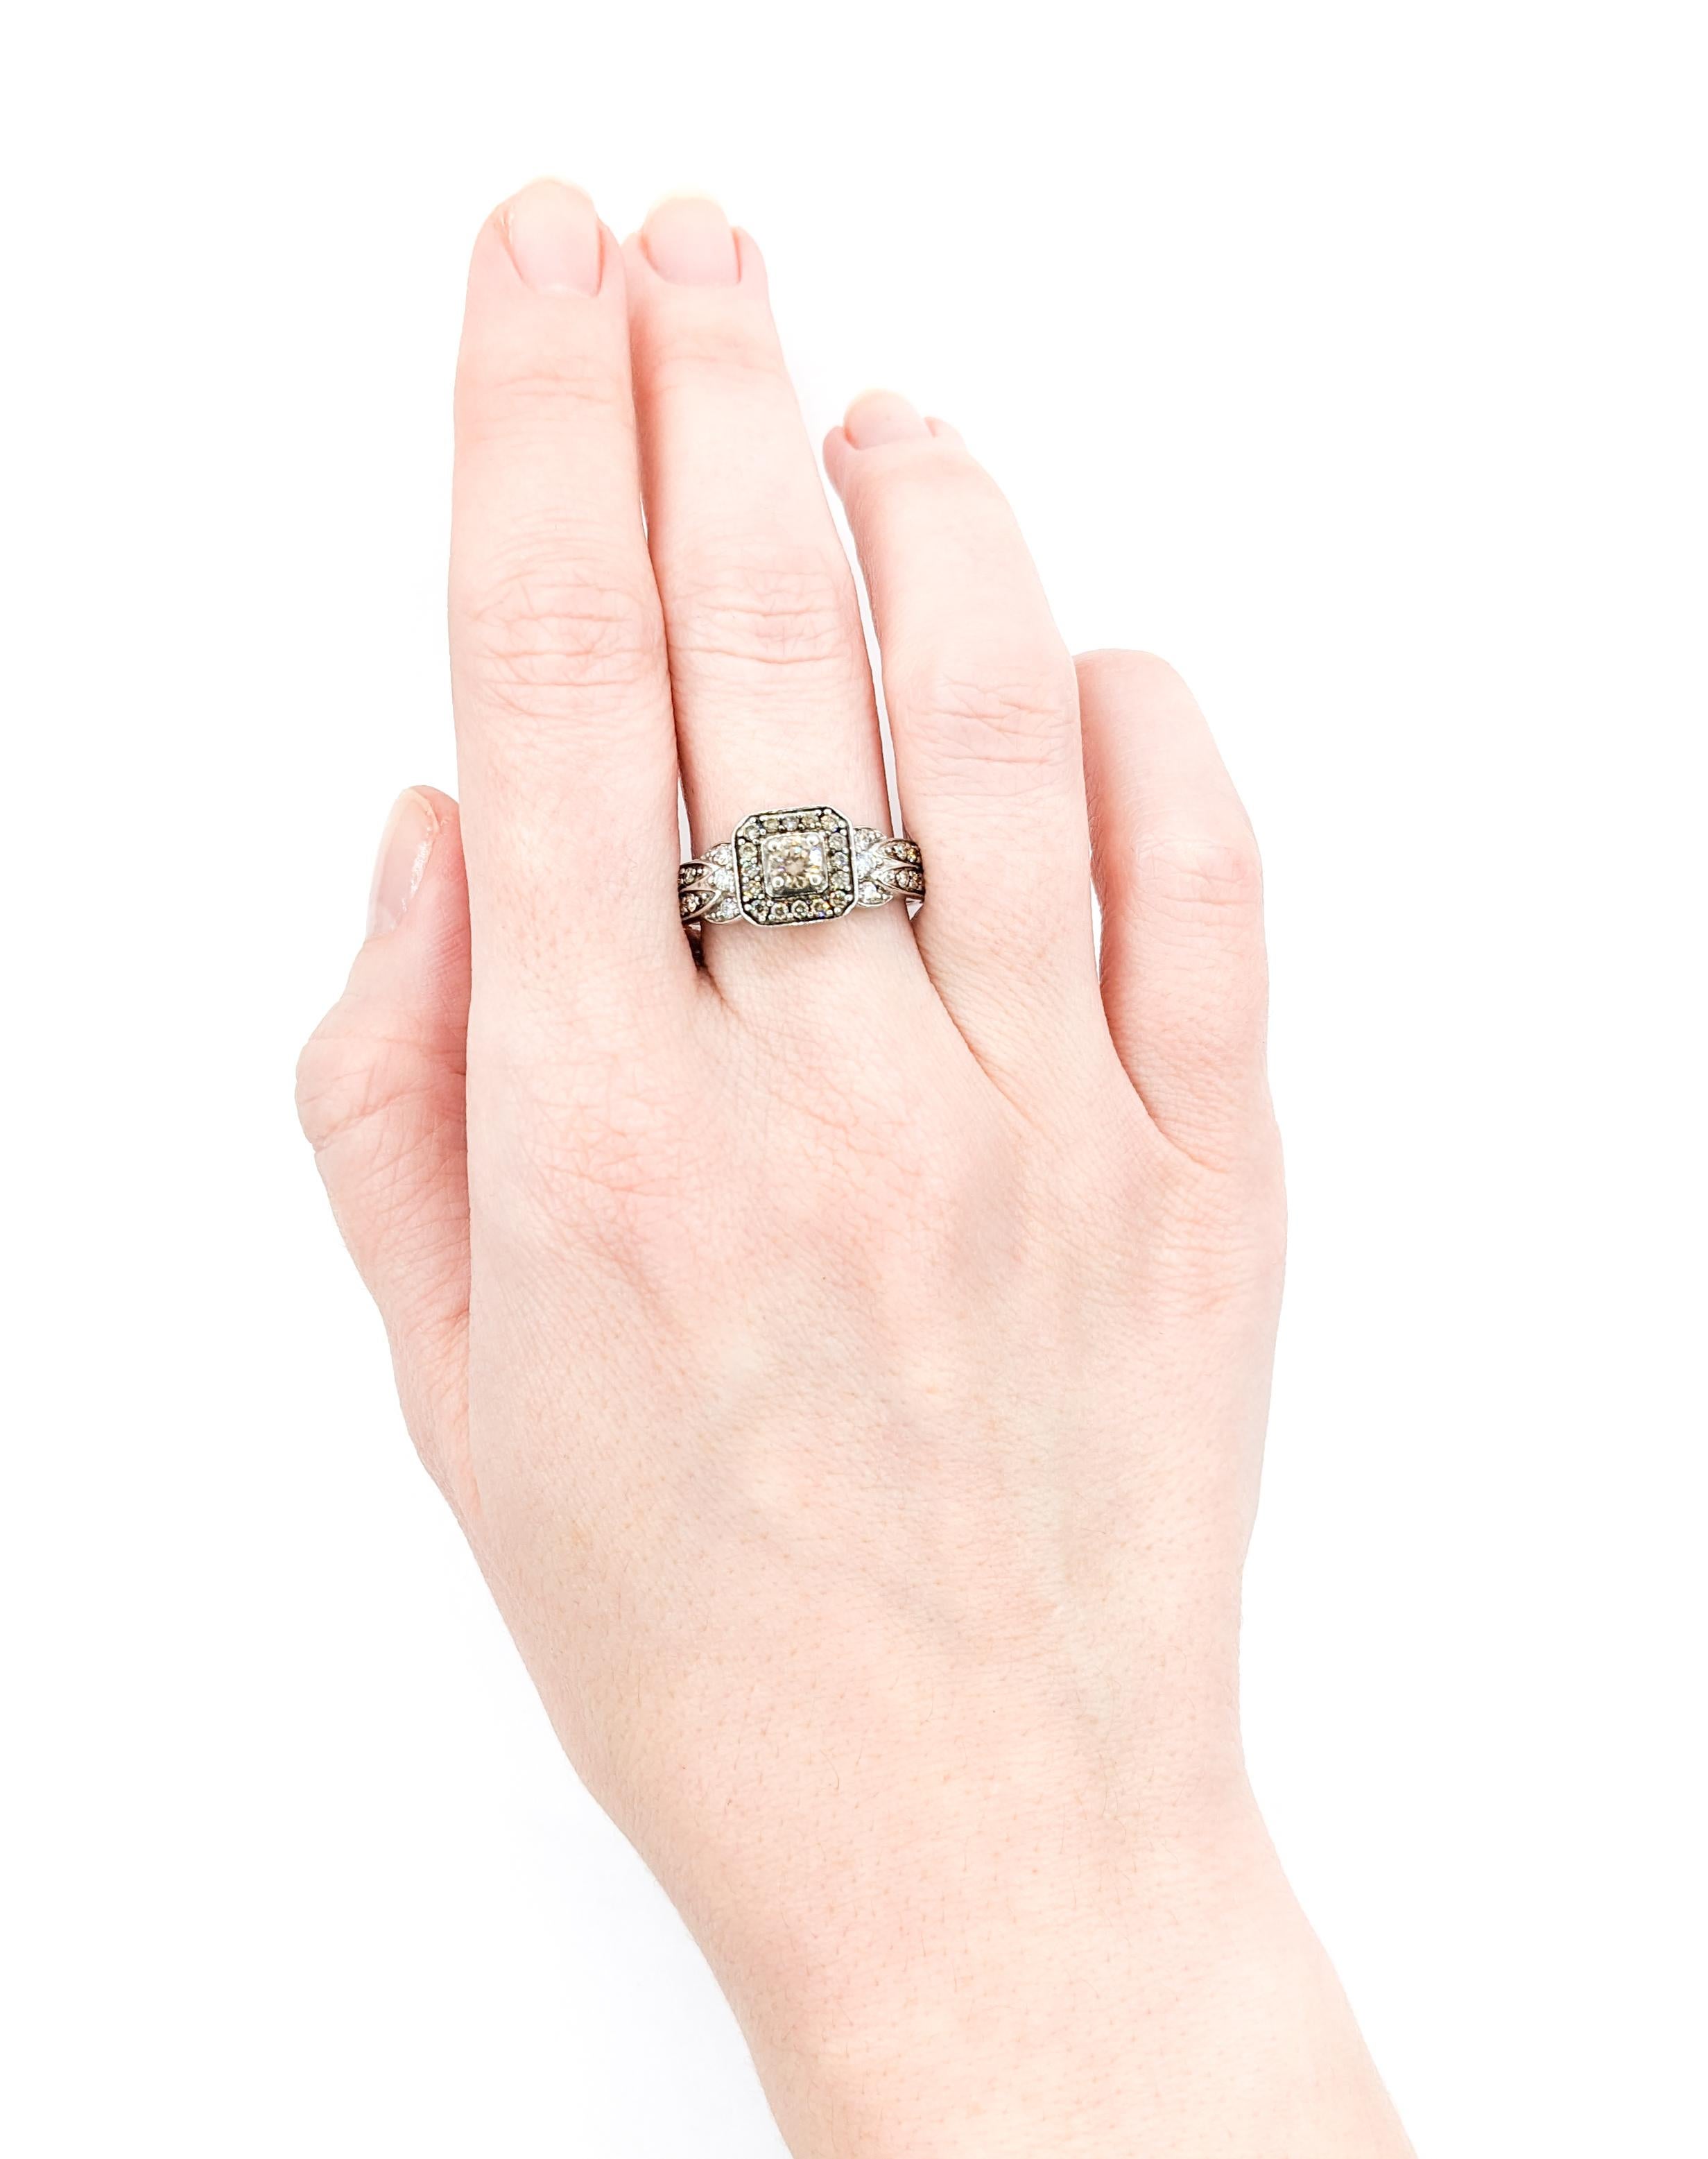 Moderne .75ctw Diamond Ring Featuring LeVian In White Gold en vente